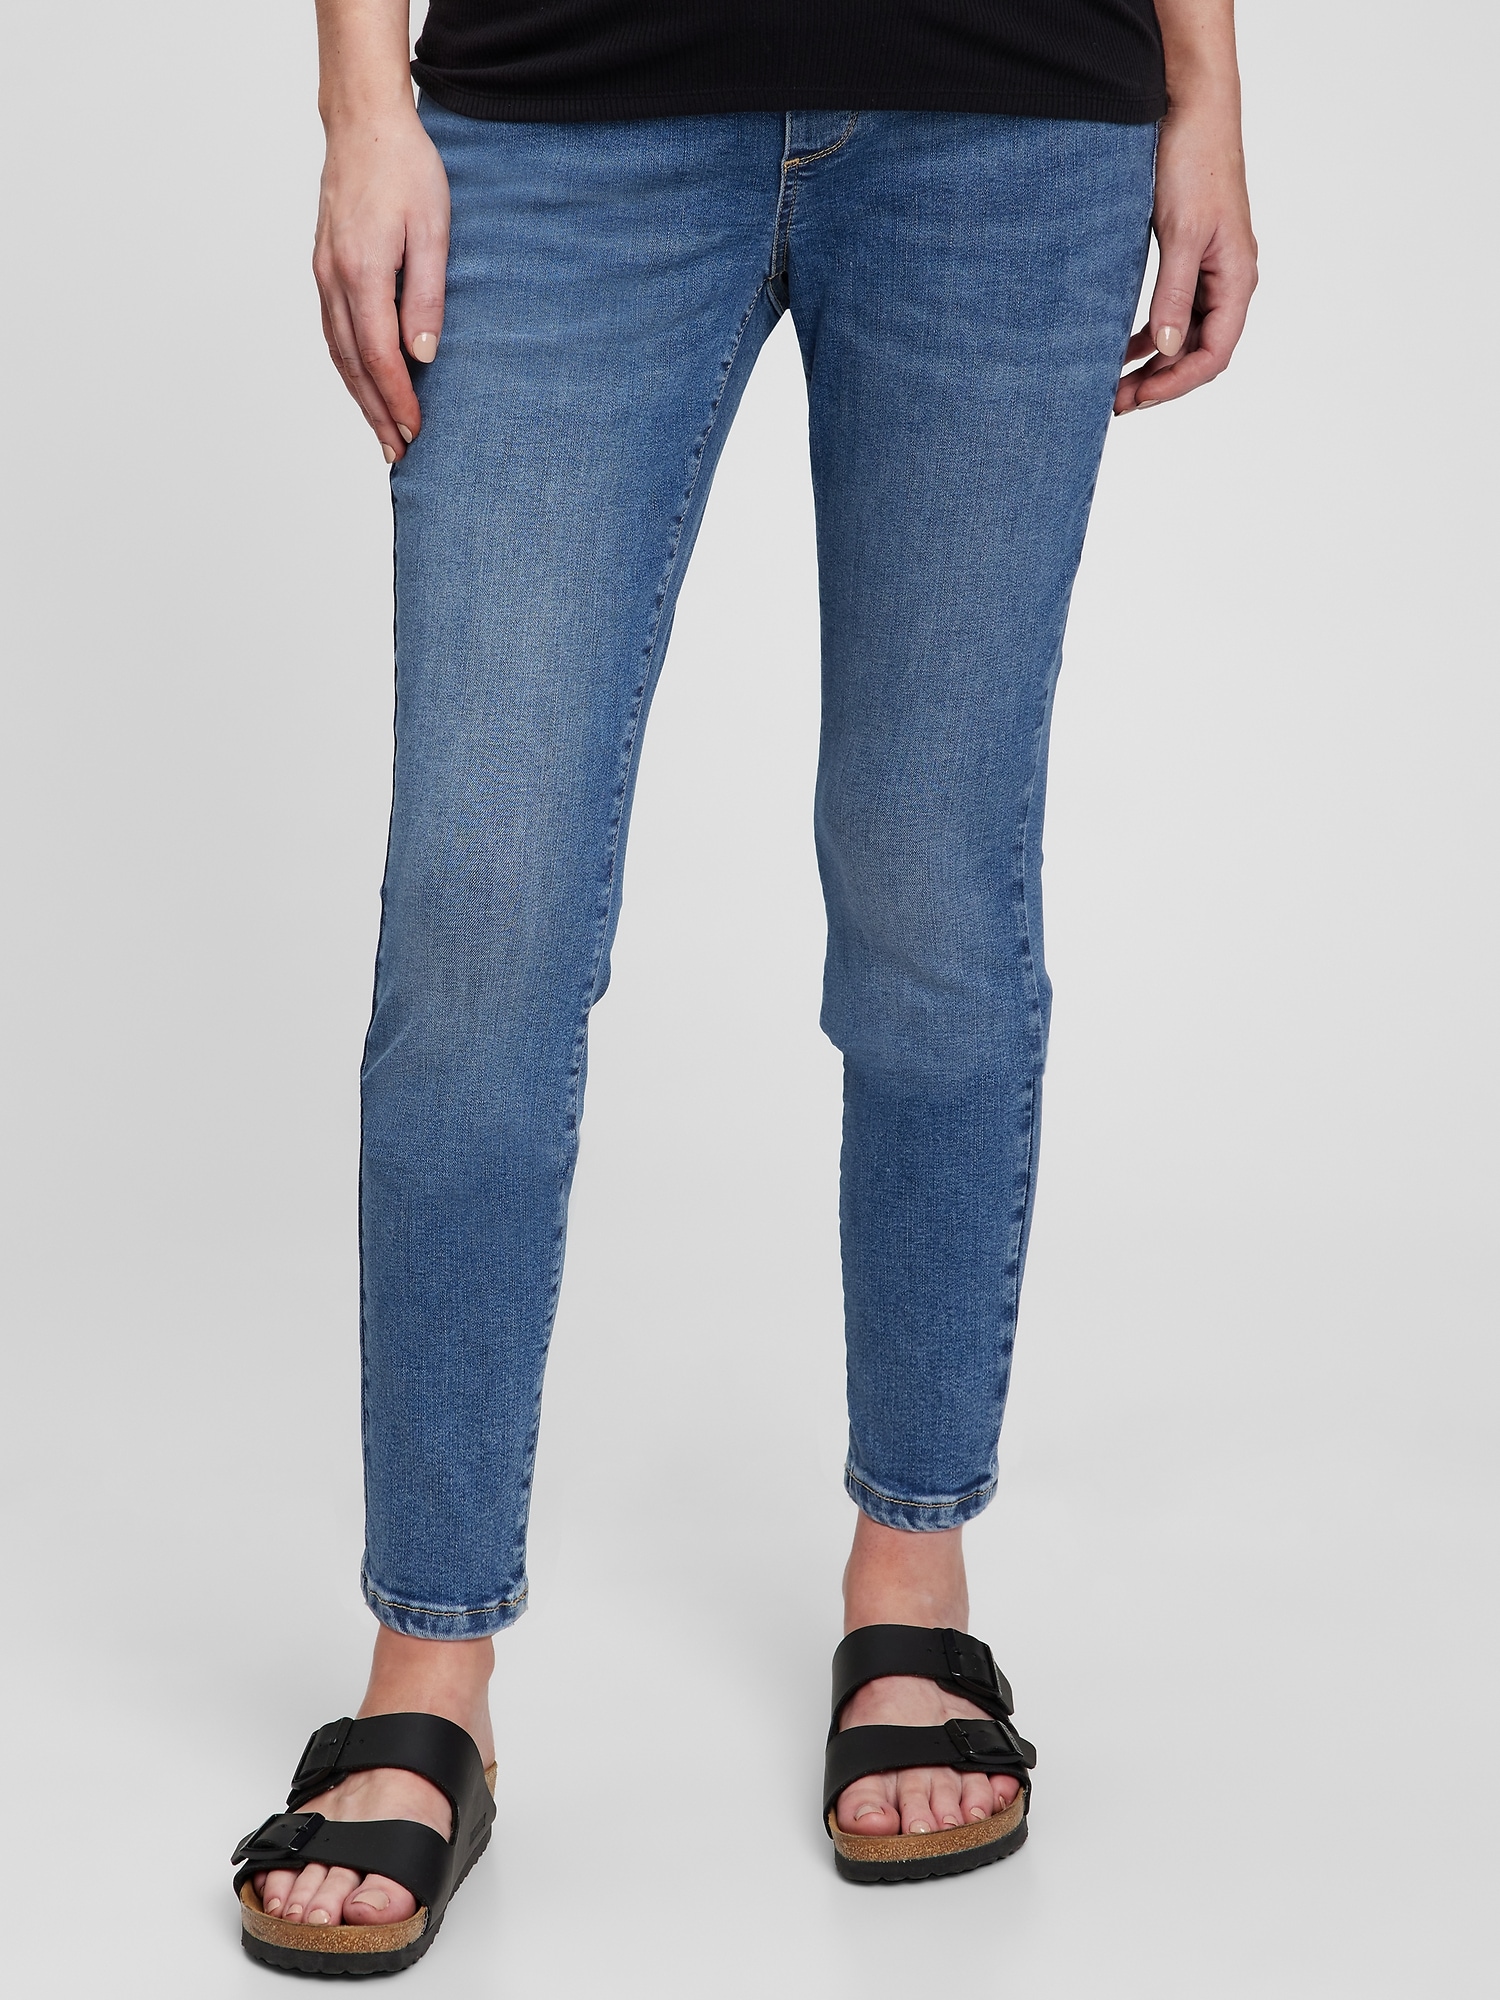 Gap Maternity Full Panel Skinny Jeans With Washwell In Medium Wash